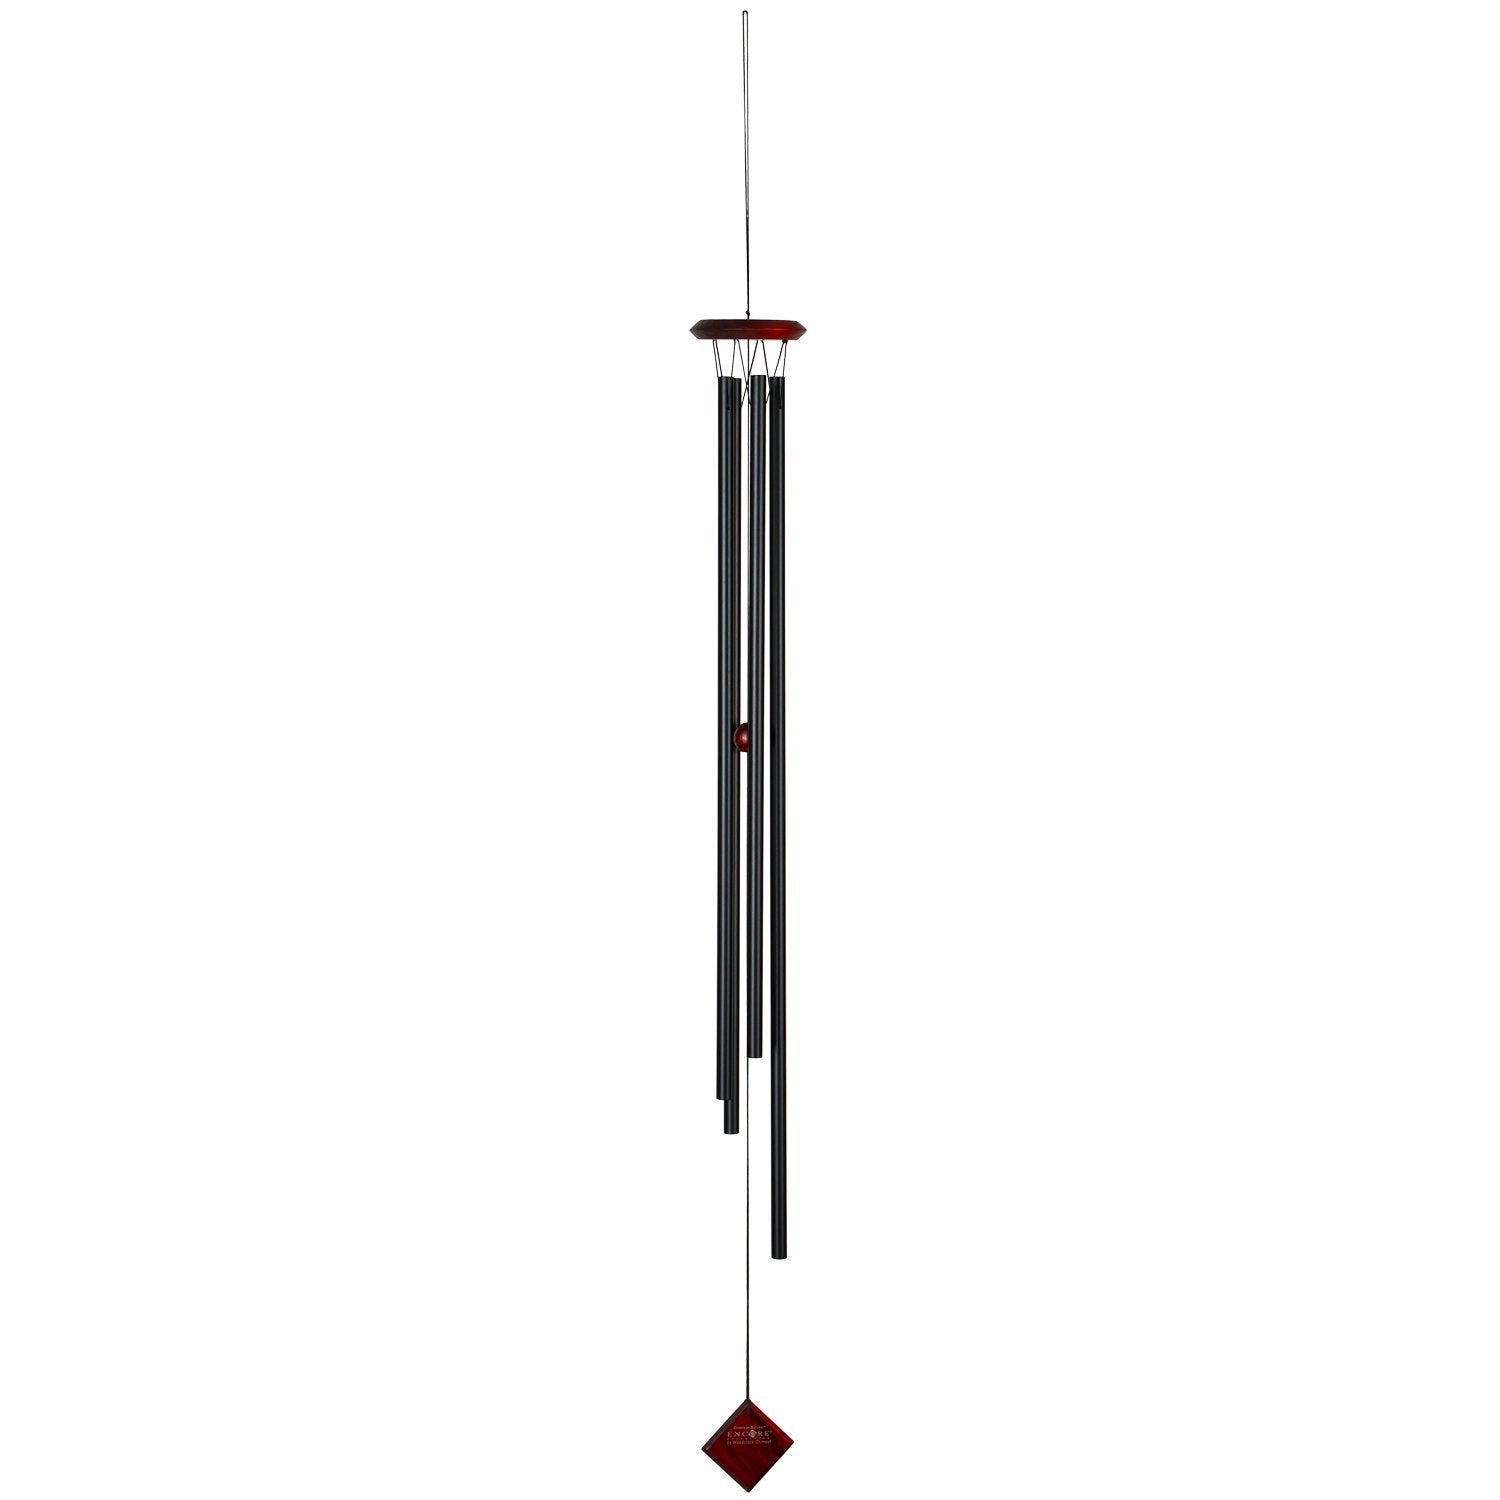 Encore Chimes of Saturn - Black full product image